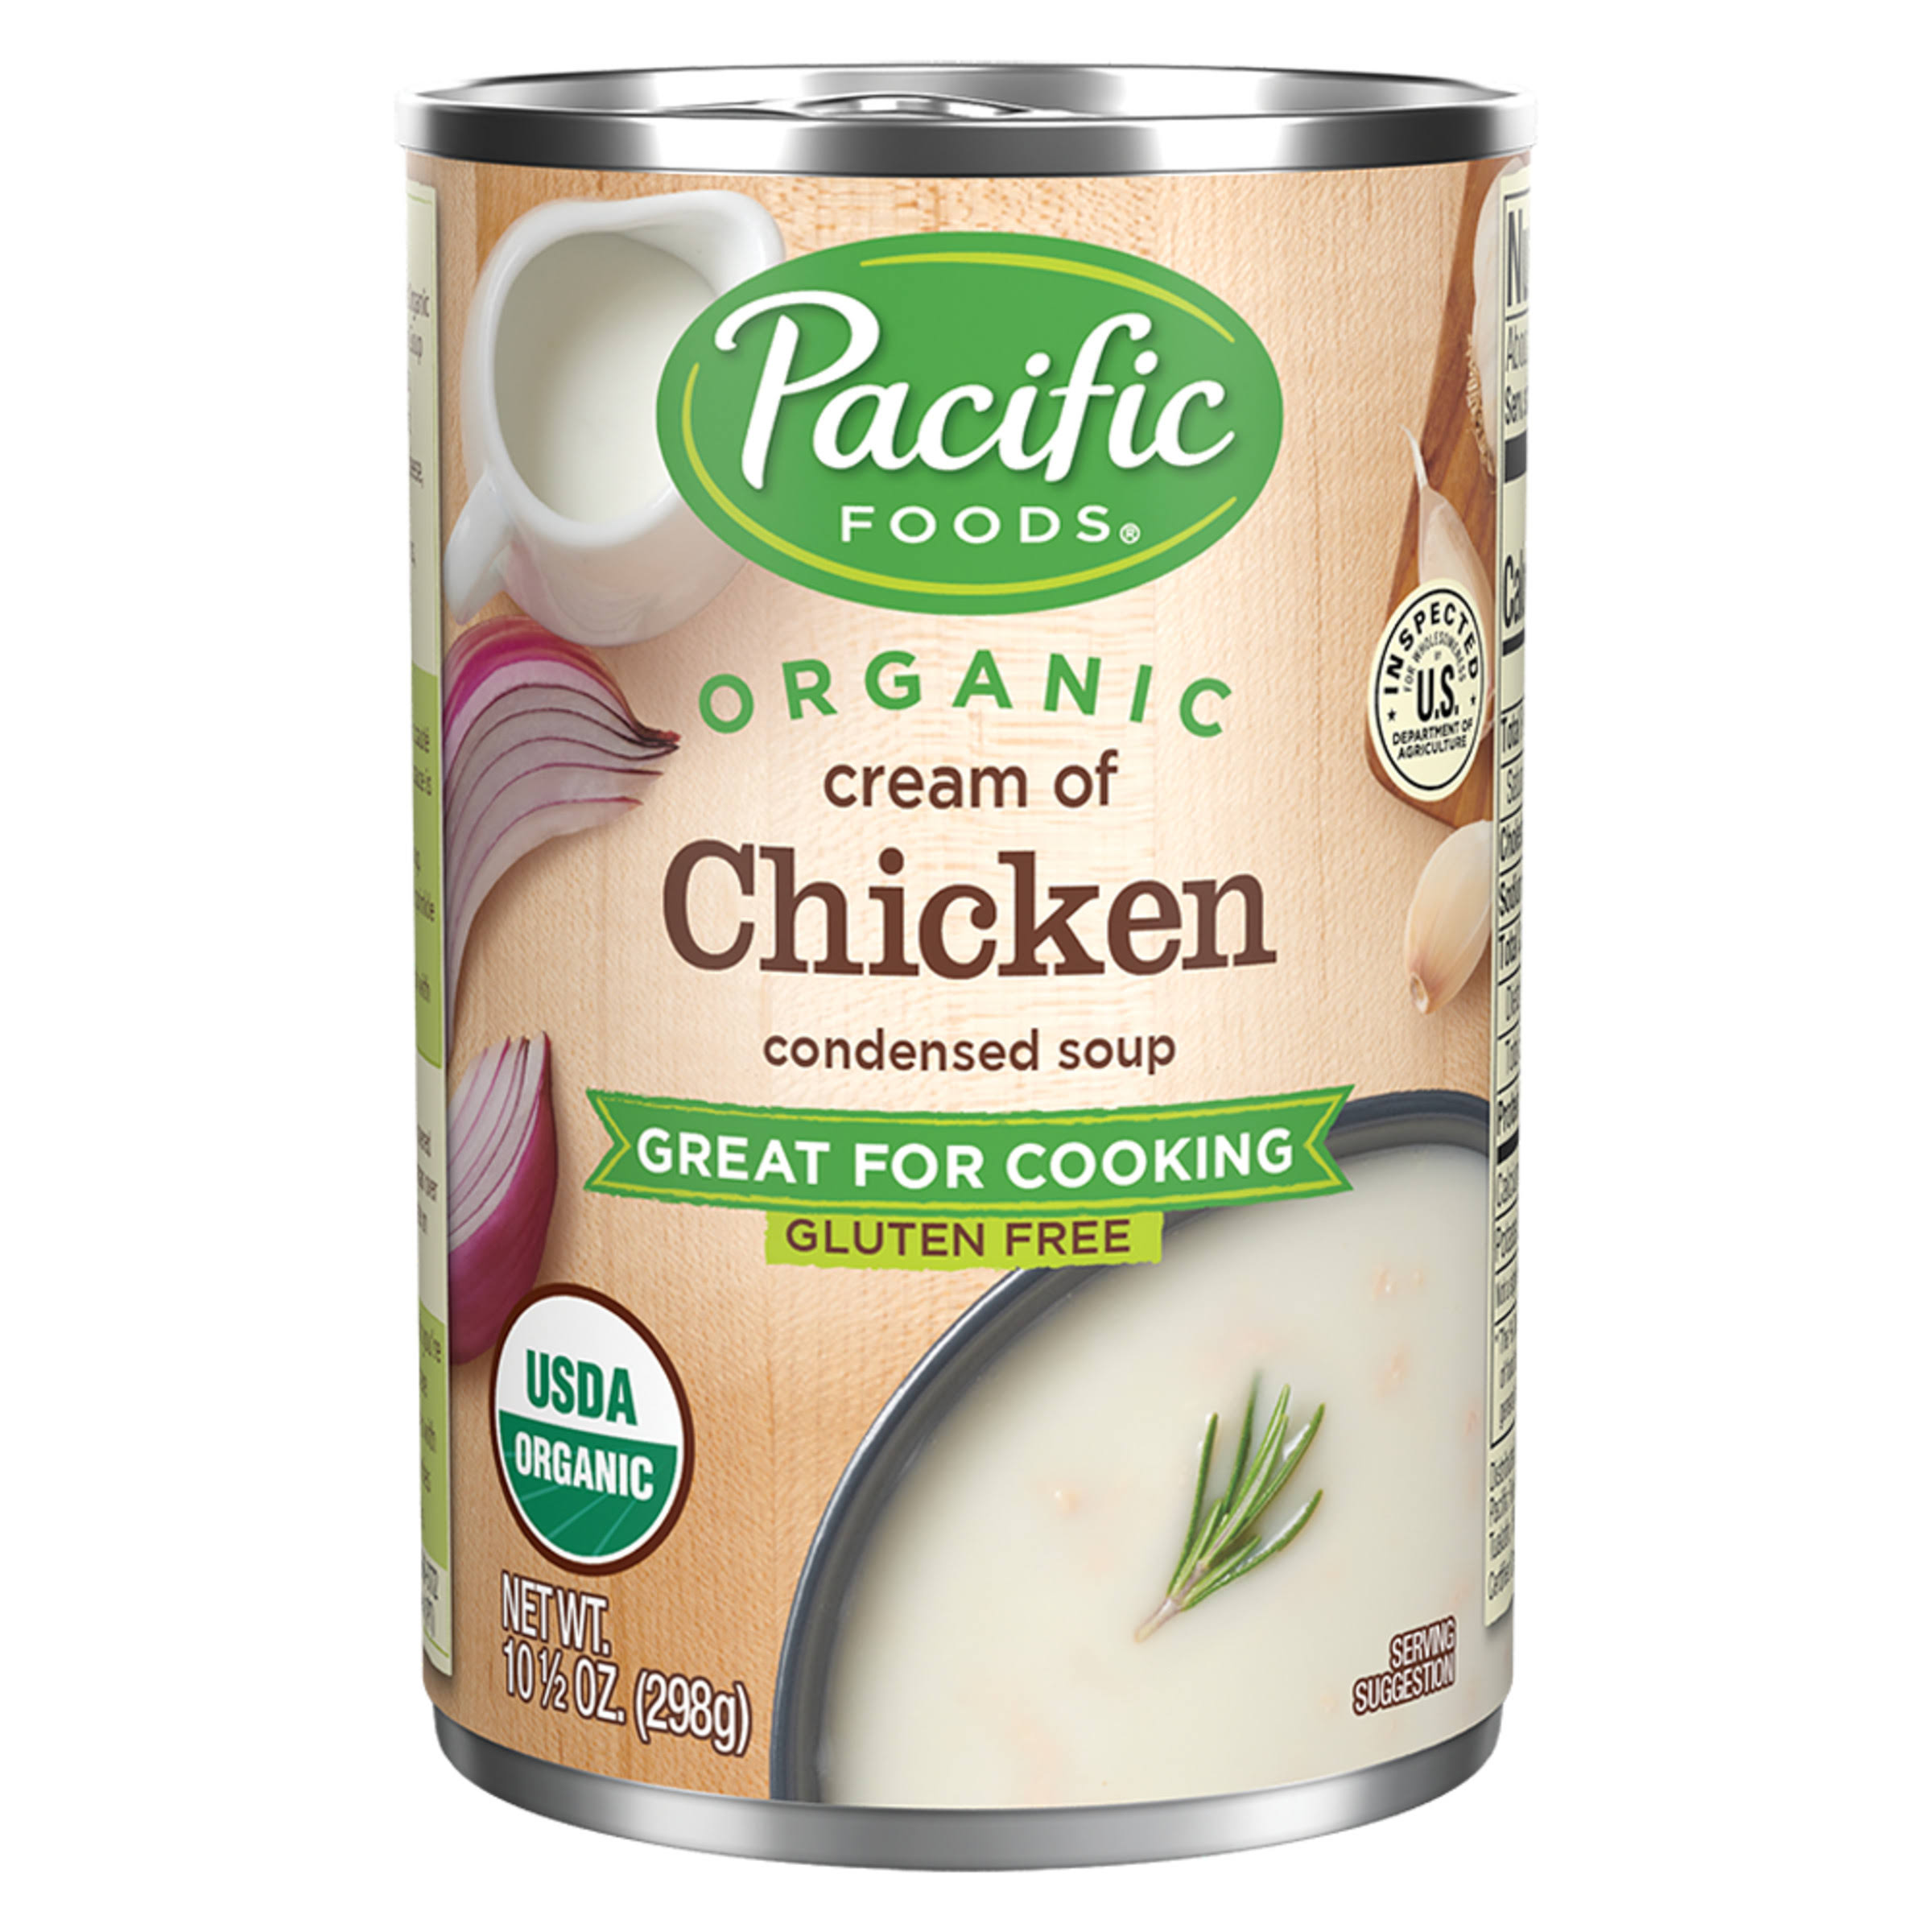 Pacific Foods Condensed Soup, Organic, Cream of Chicken - 10.5 oz